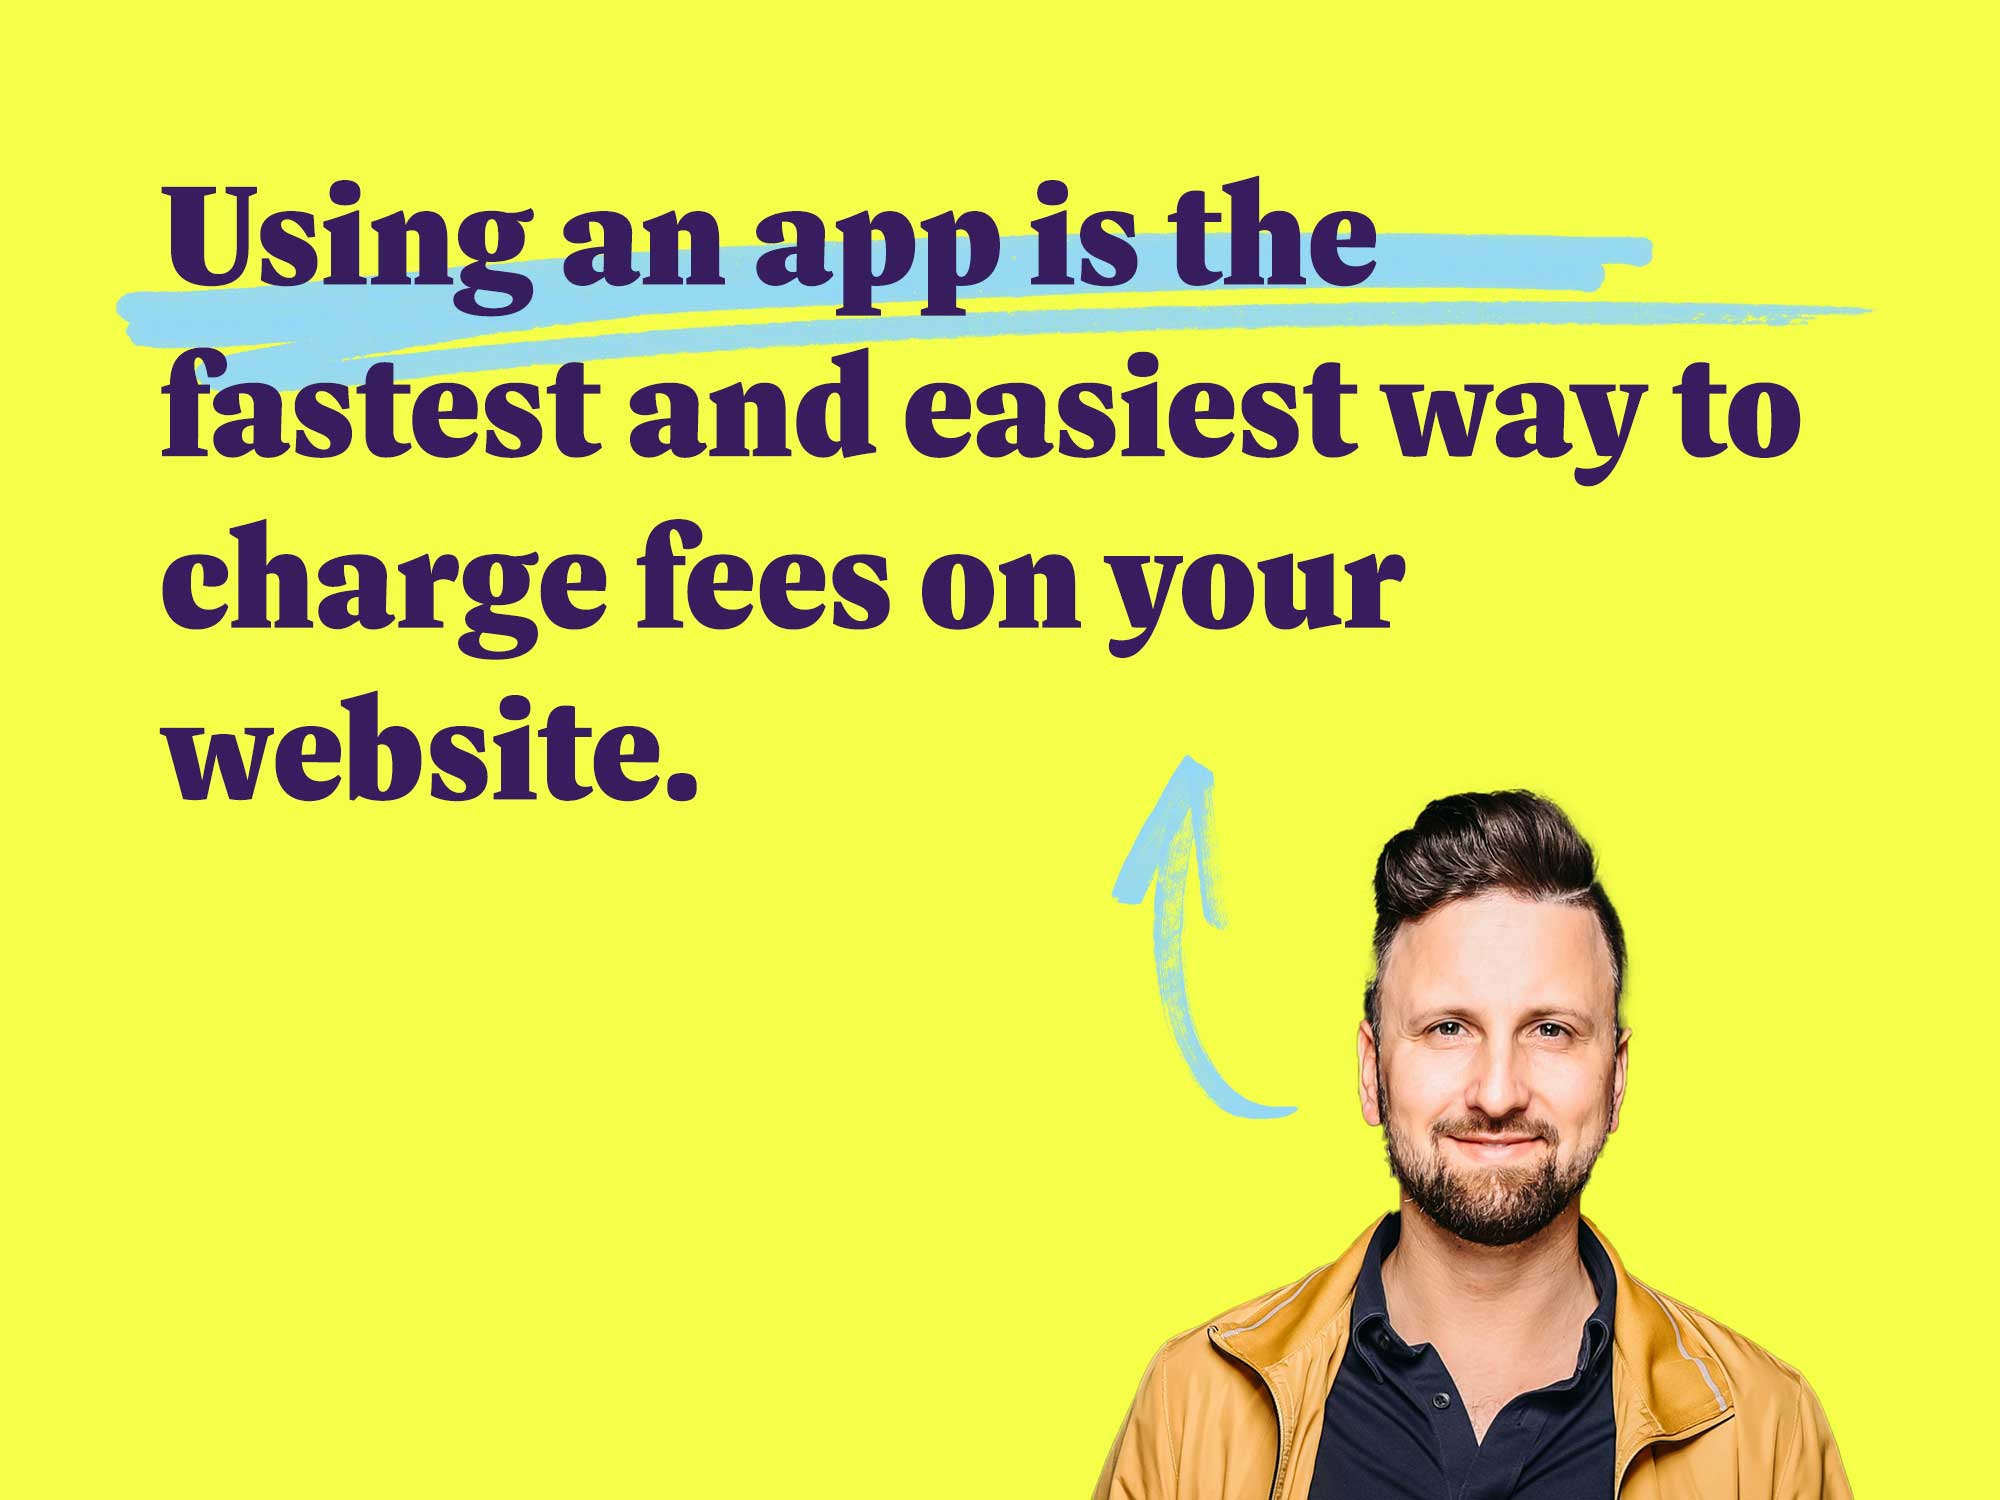 Using an app is the fastest and easiest way to charge fees on your website.